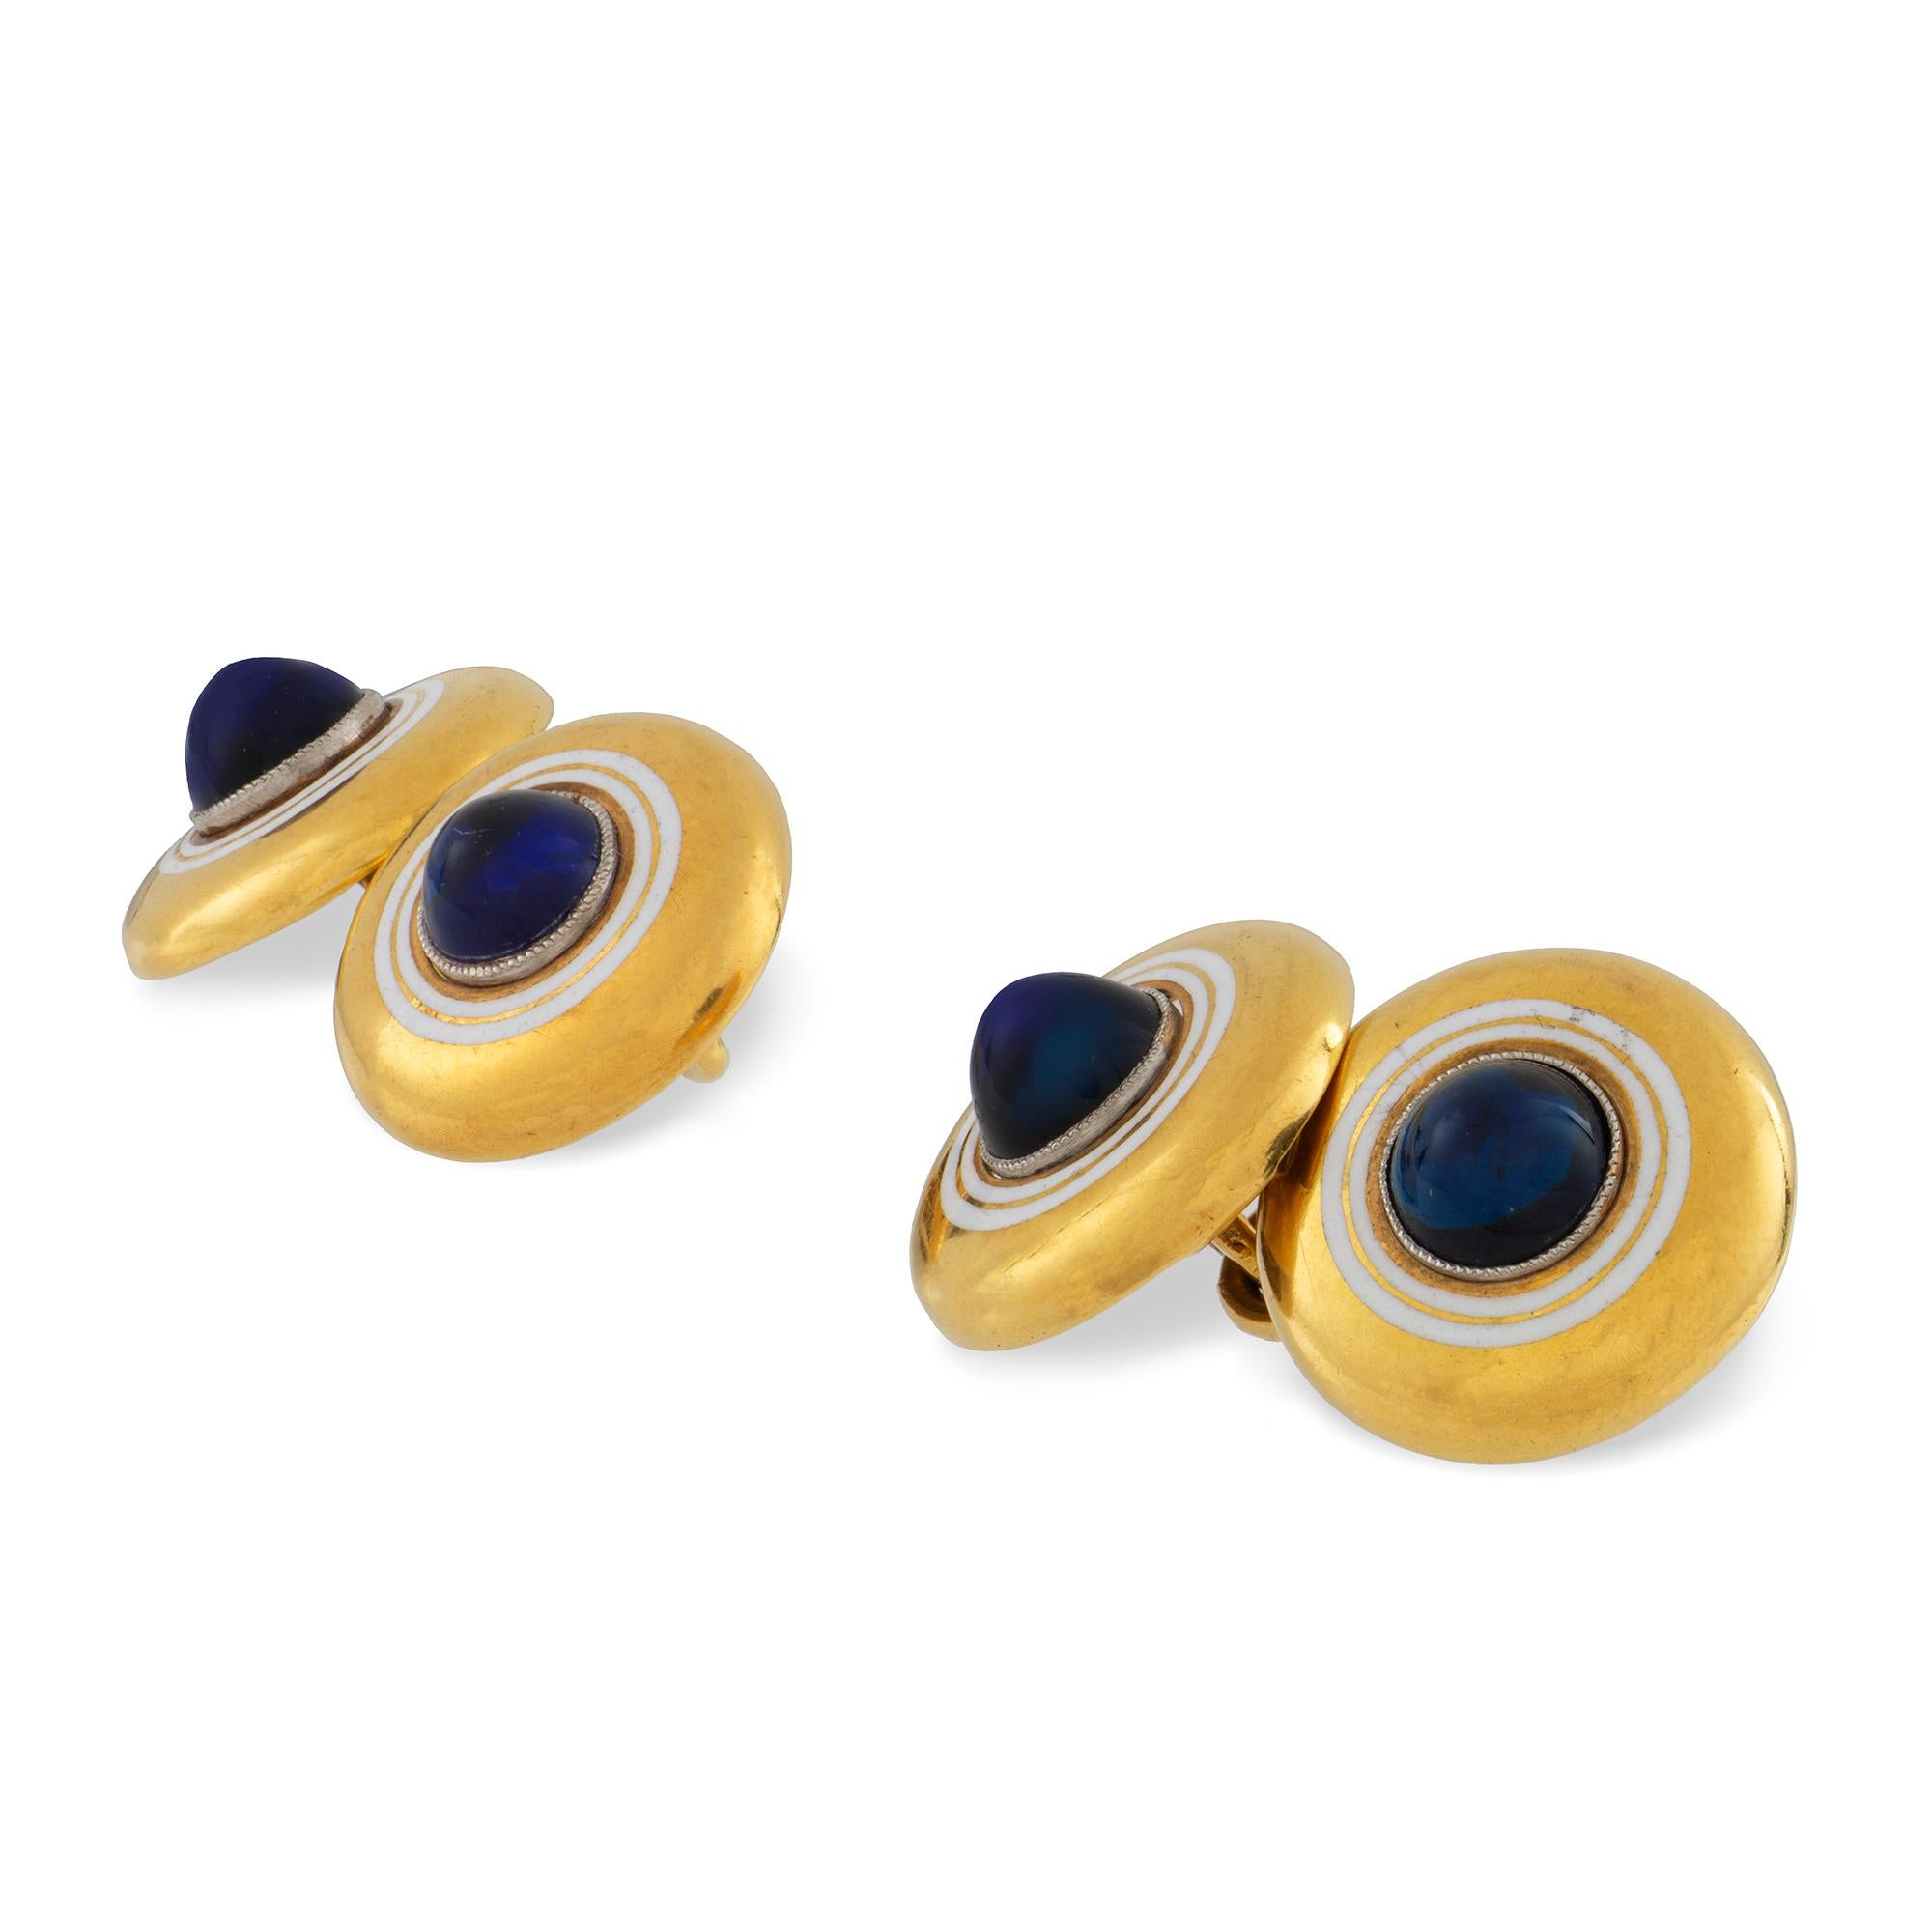 A pair of cabochon sapphire and enamel cufflinks, the centre a cabochon sapphire surrounded by two bands of white enamel on 18ct  yellow gold round discs with chain links, stamped 18ct, circa 1920, measuring approximately 1.5cm in diameter, gross